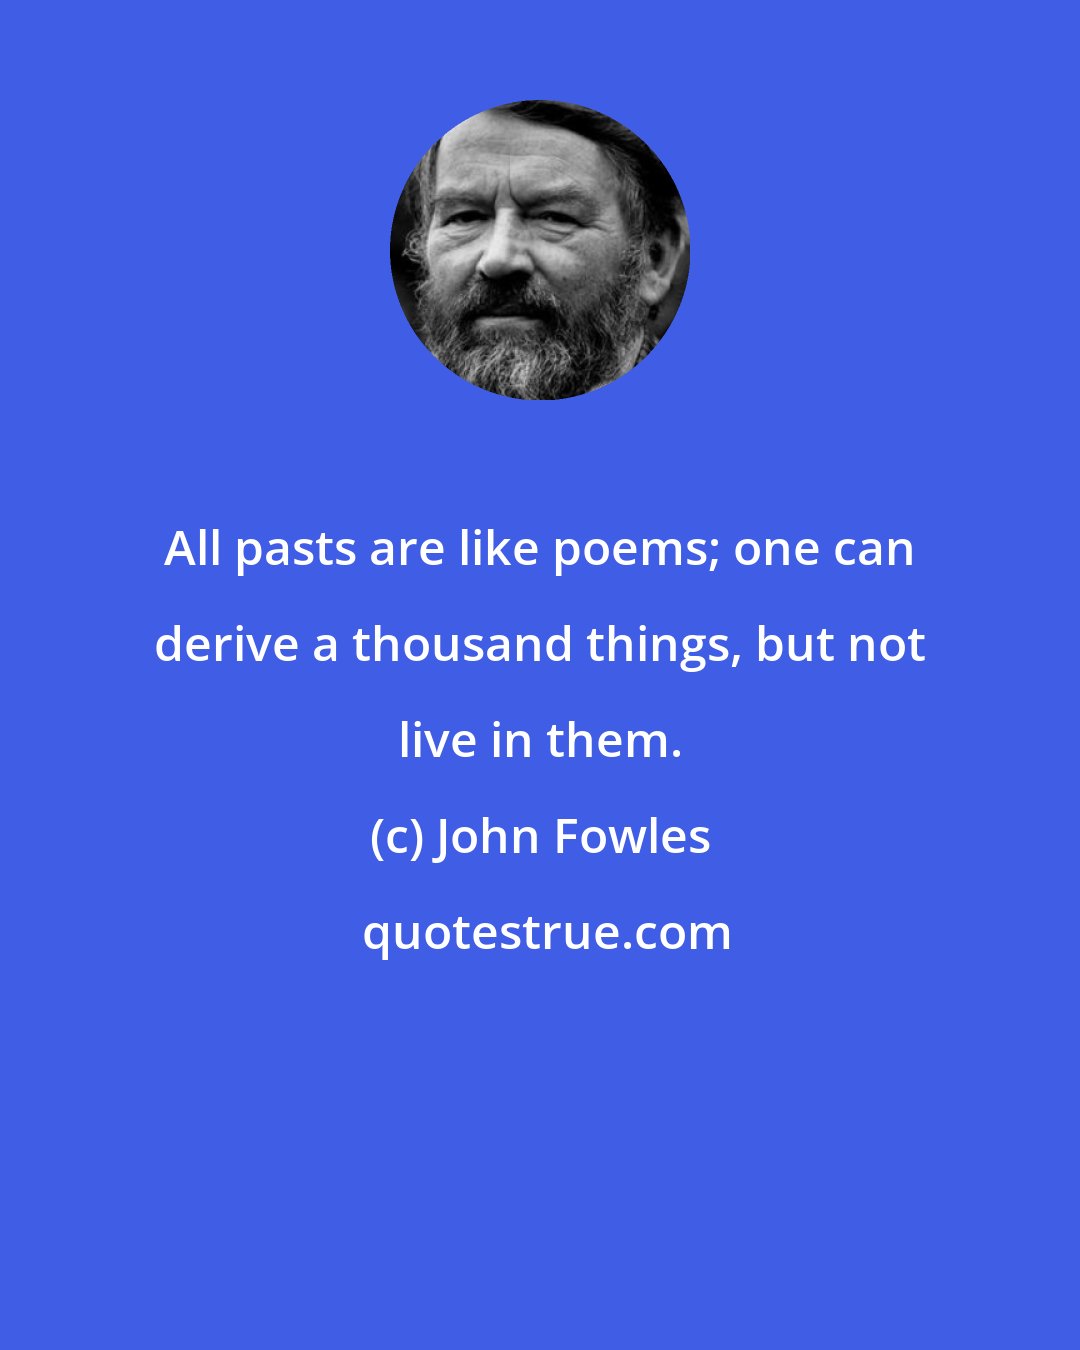 John Fowles: All pasts are like poems; one can derive a thousand things, but not live in them.